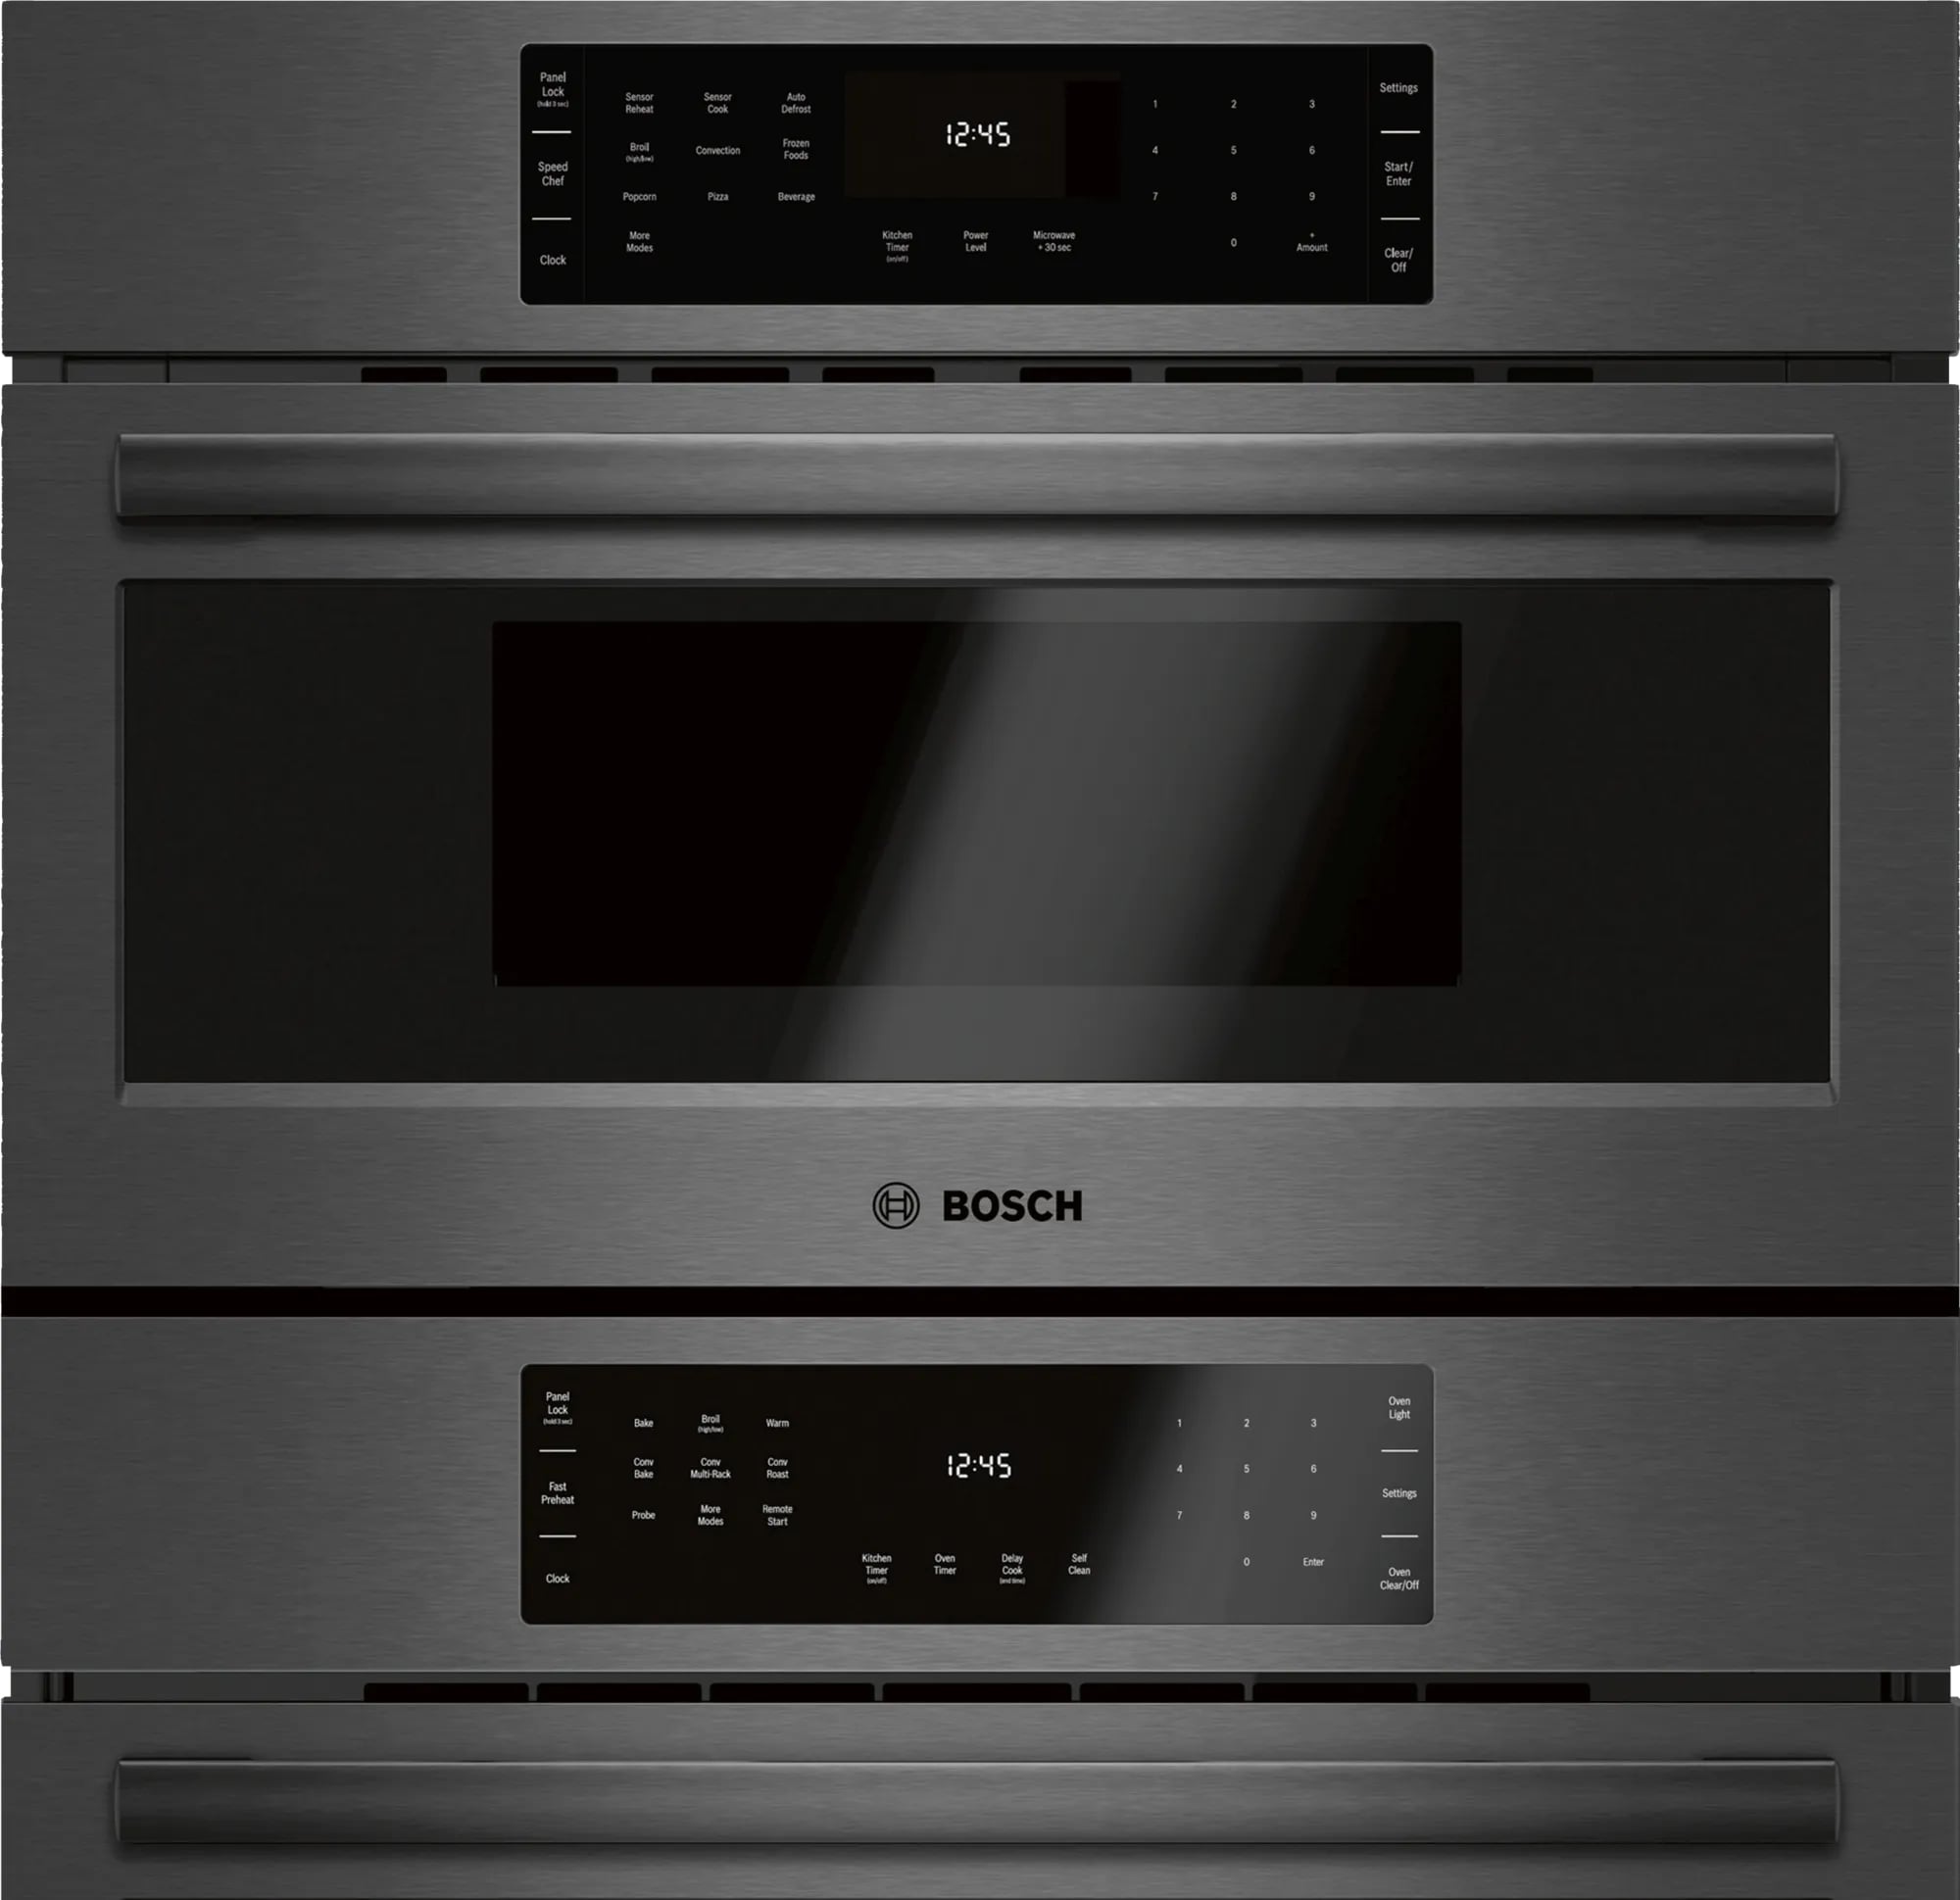 Bosch - 6.2 cu. ft Combination Wall Oven in Black Stainless - HBL8743UC